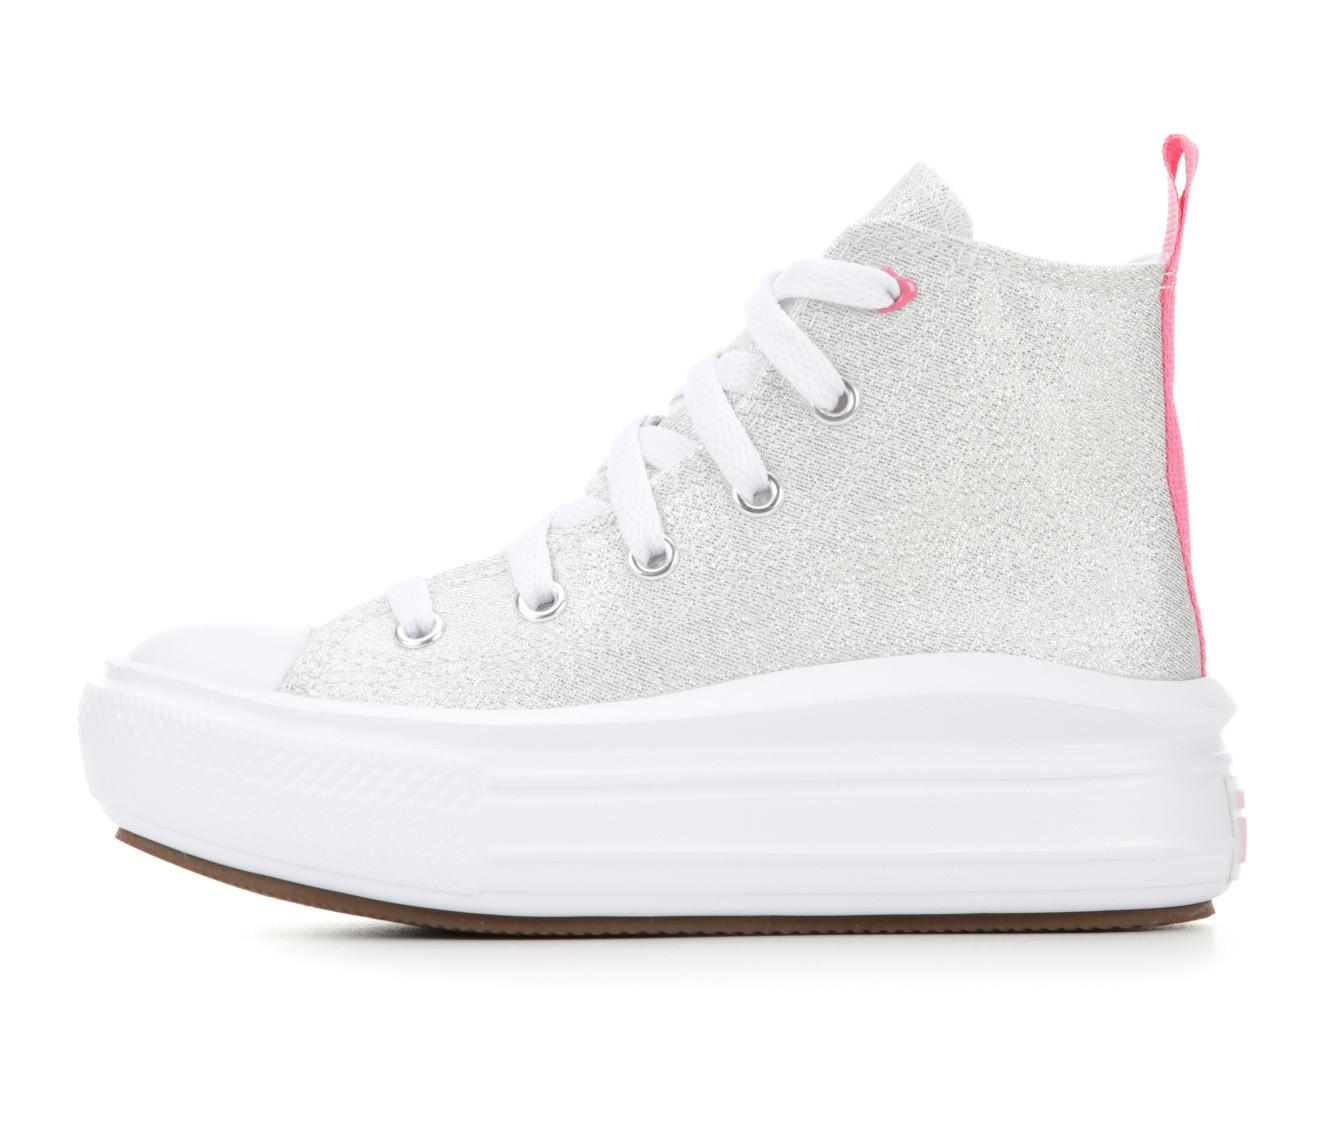 Girls' Converse Little Kid CTAS Move Be Dazzling Sneakers